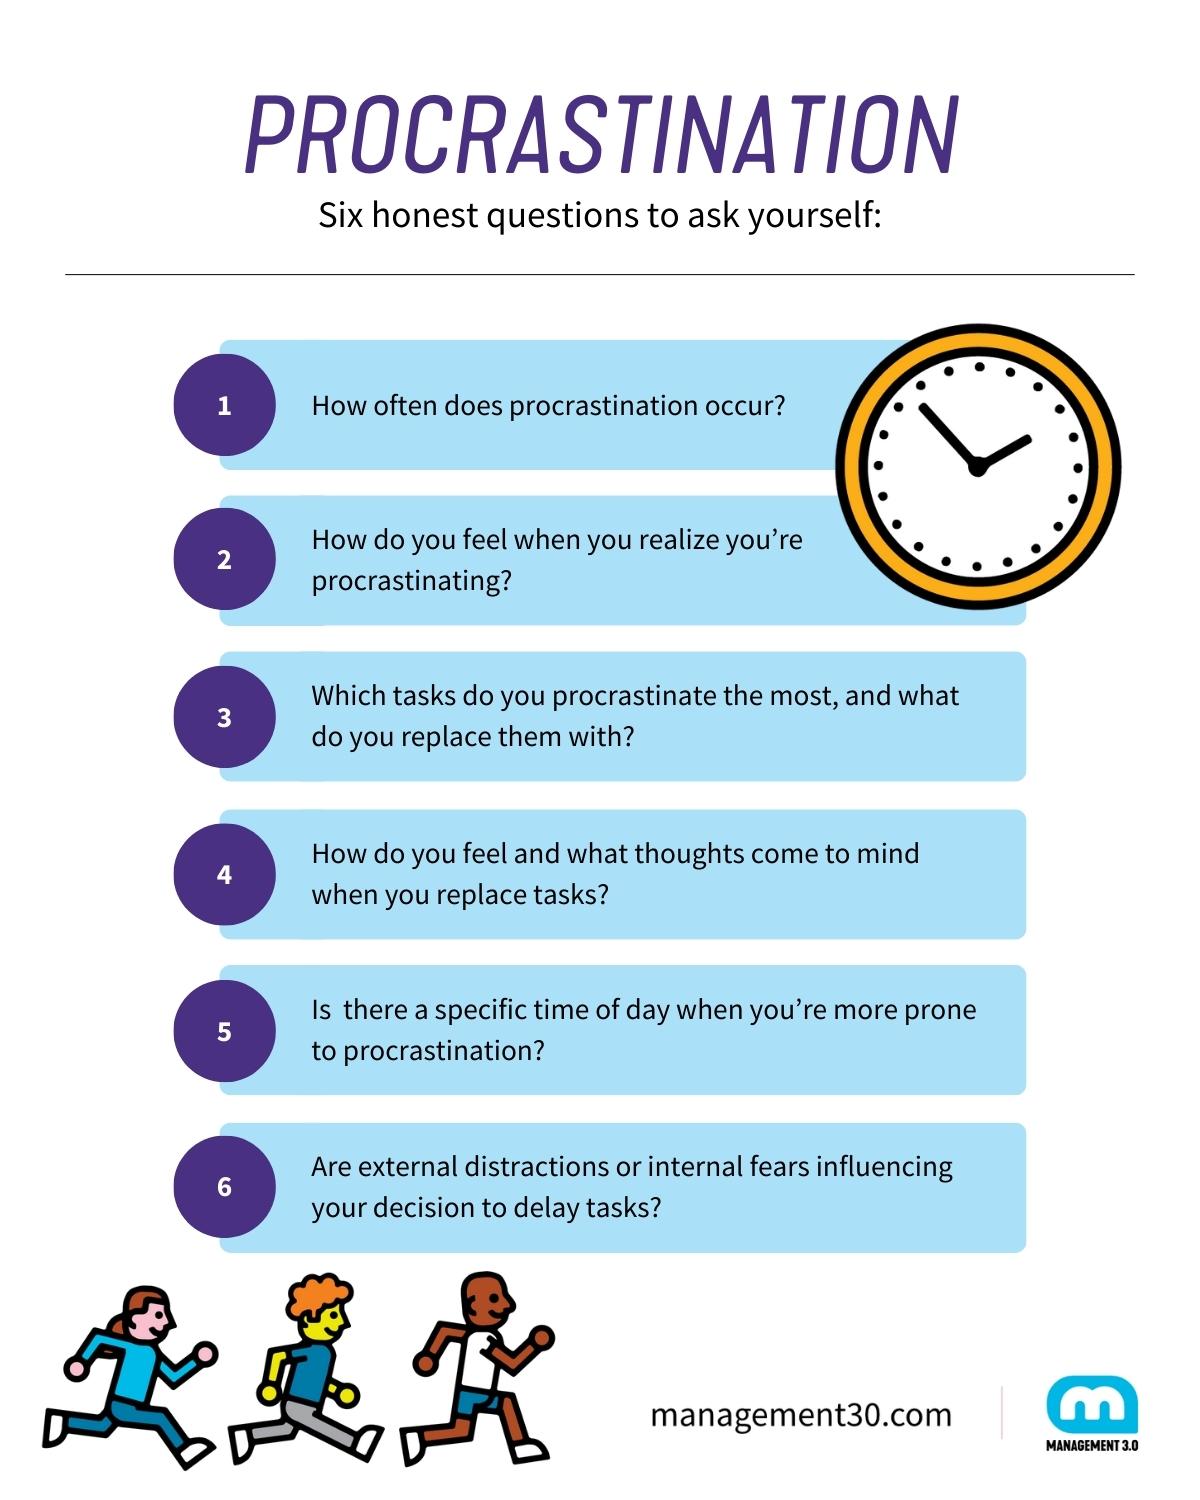 Overcoming Procrastination: Six honest questions to ask yourself